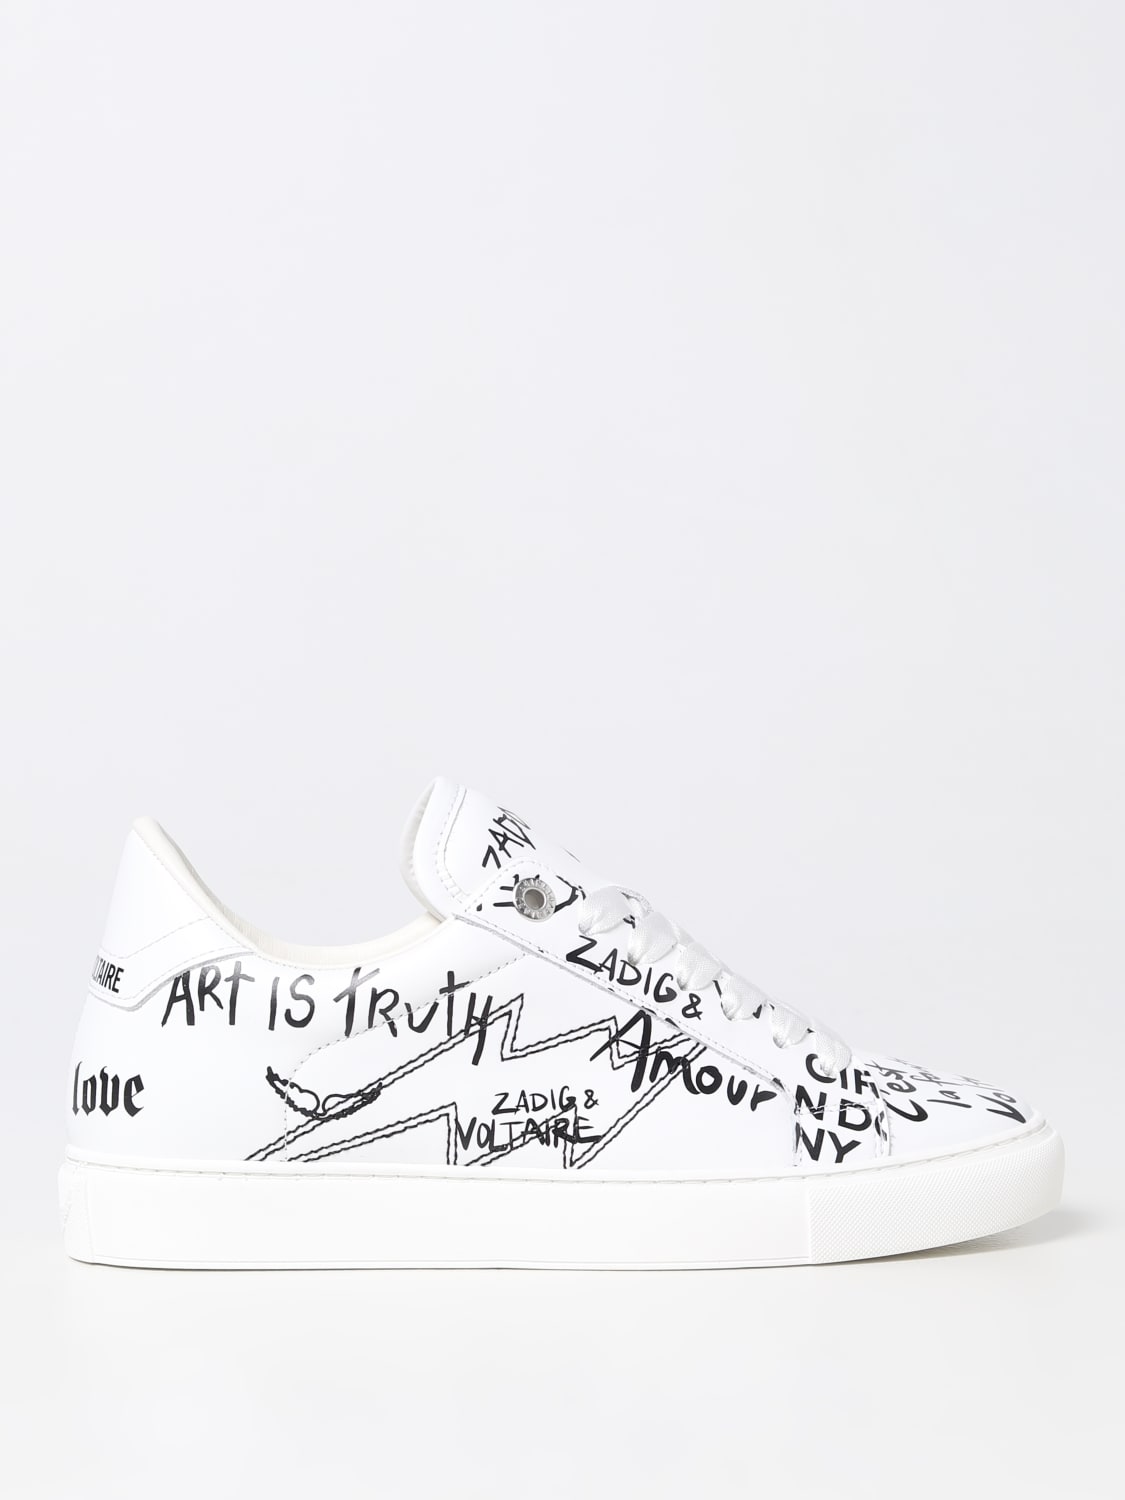 & sneakers ZADIG sneakers Voltaire | woman at - online Zadig for White & SWSN00443 VOLTAIRE: